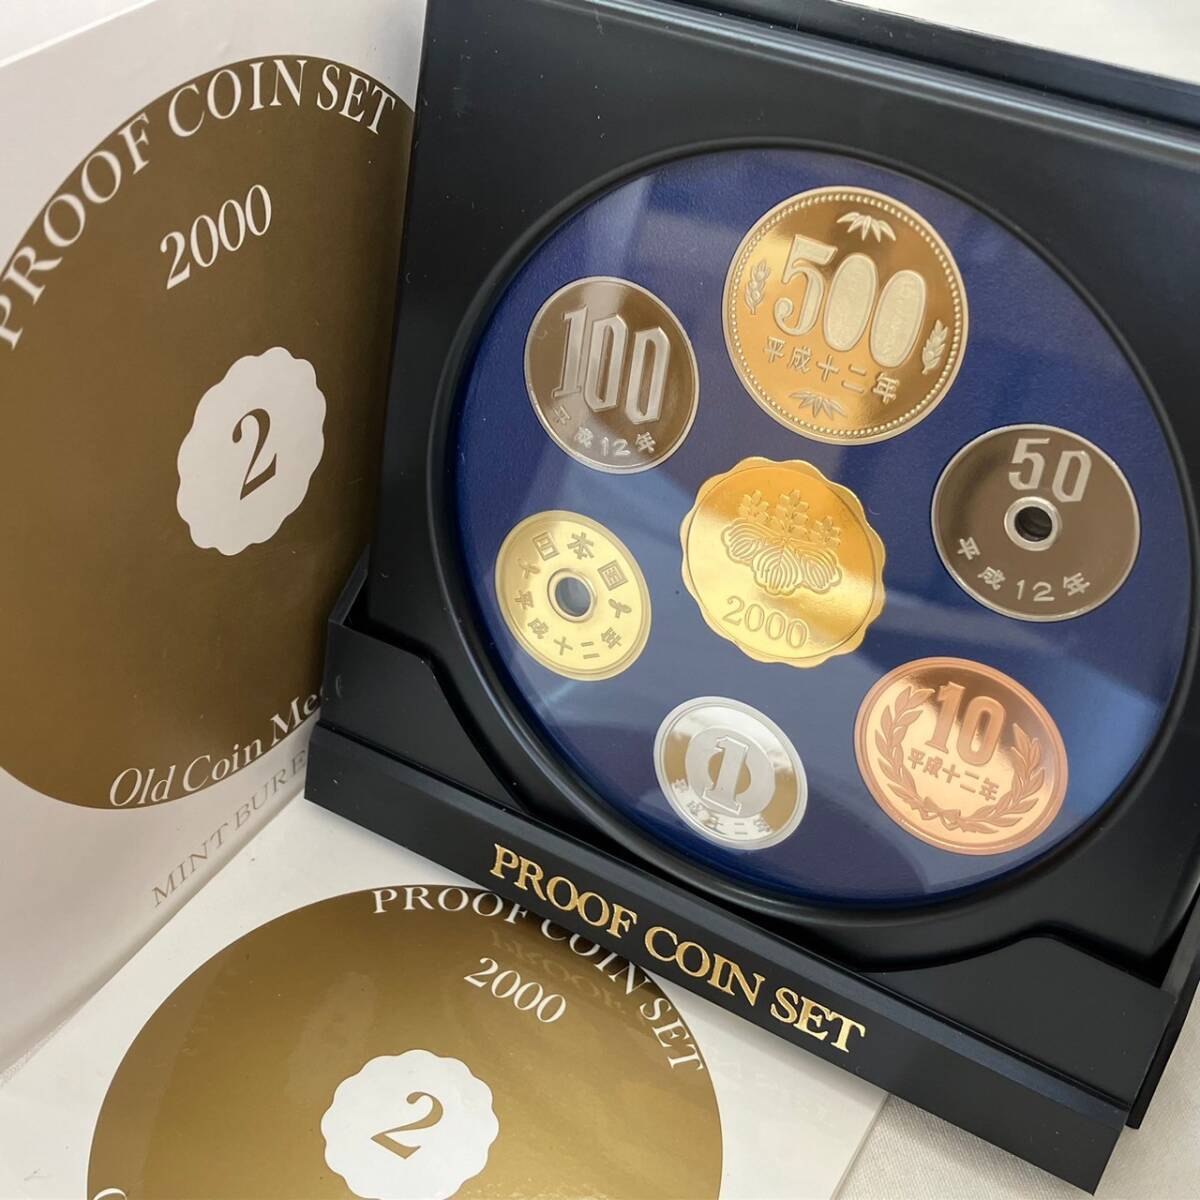 4856-2A　PROOF COIN SET 2000 Old Coin Medal Series ミントコイン　額面総額666円　記念硬貨_画像1